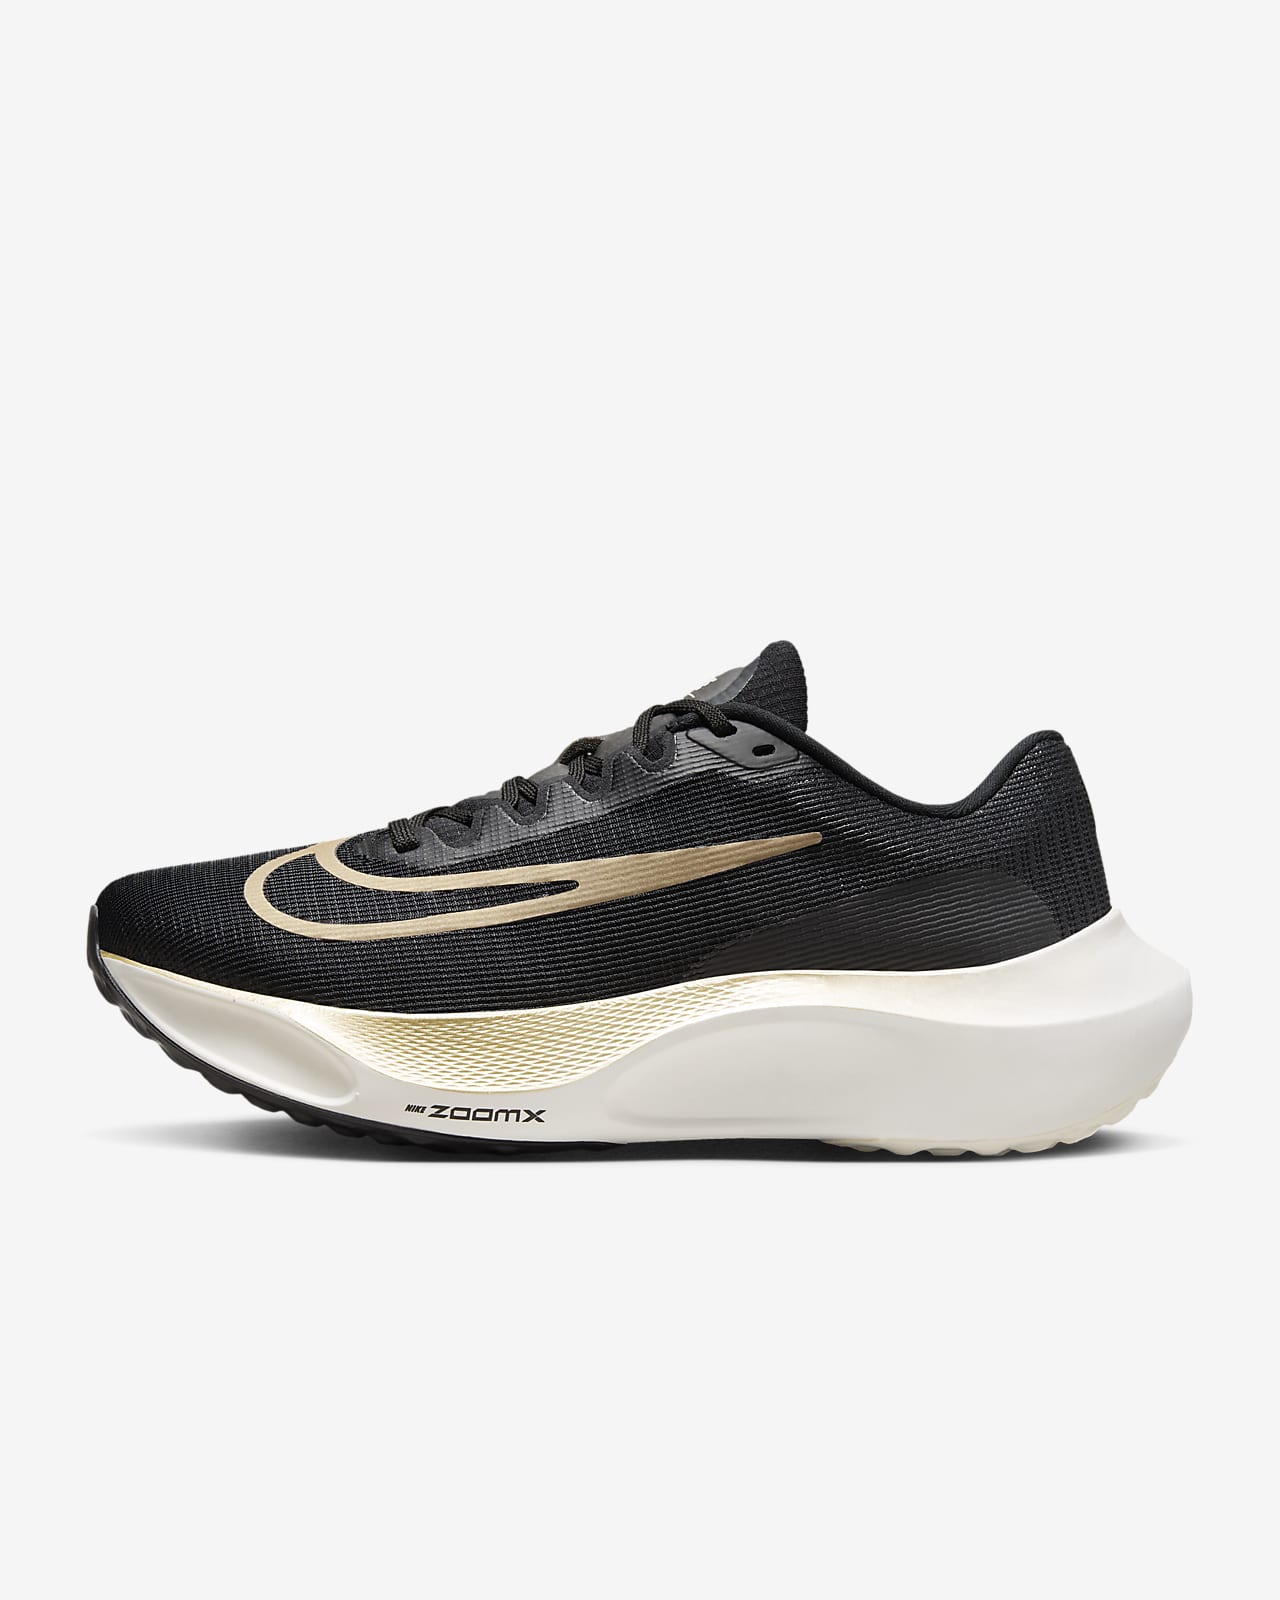 Nike Zoom Fly 5 男子 ZoomX 碳板公路跑步鞋